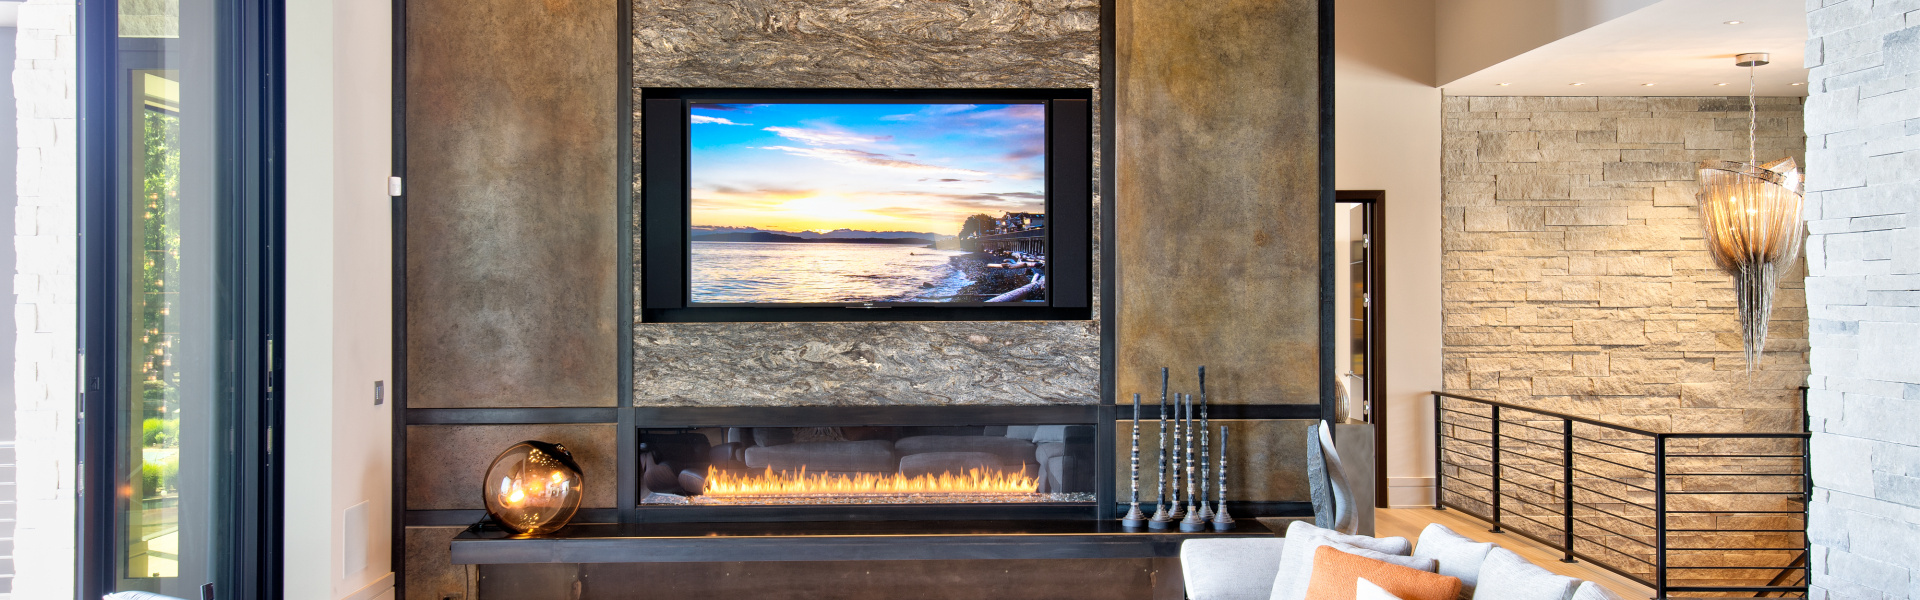 Smart home installation by Premier Group for Carmel